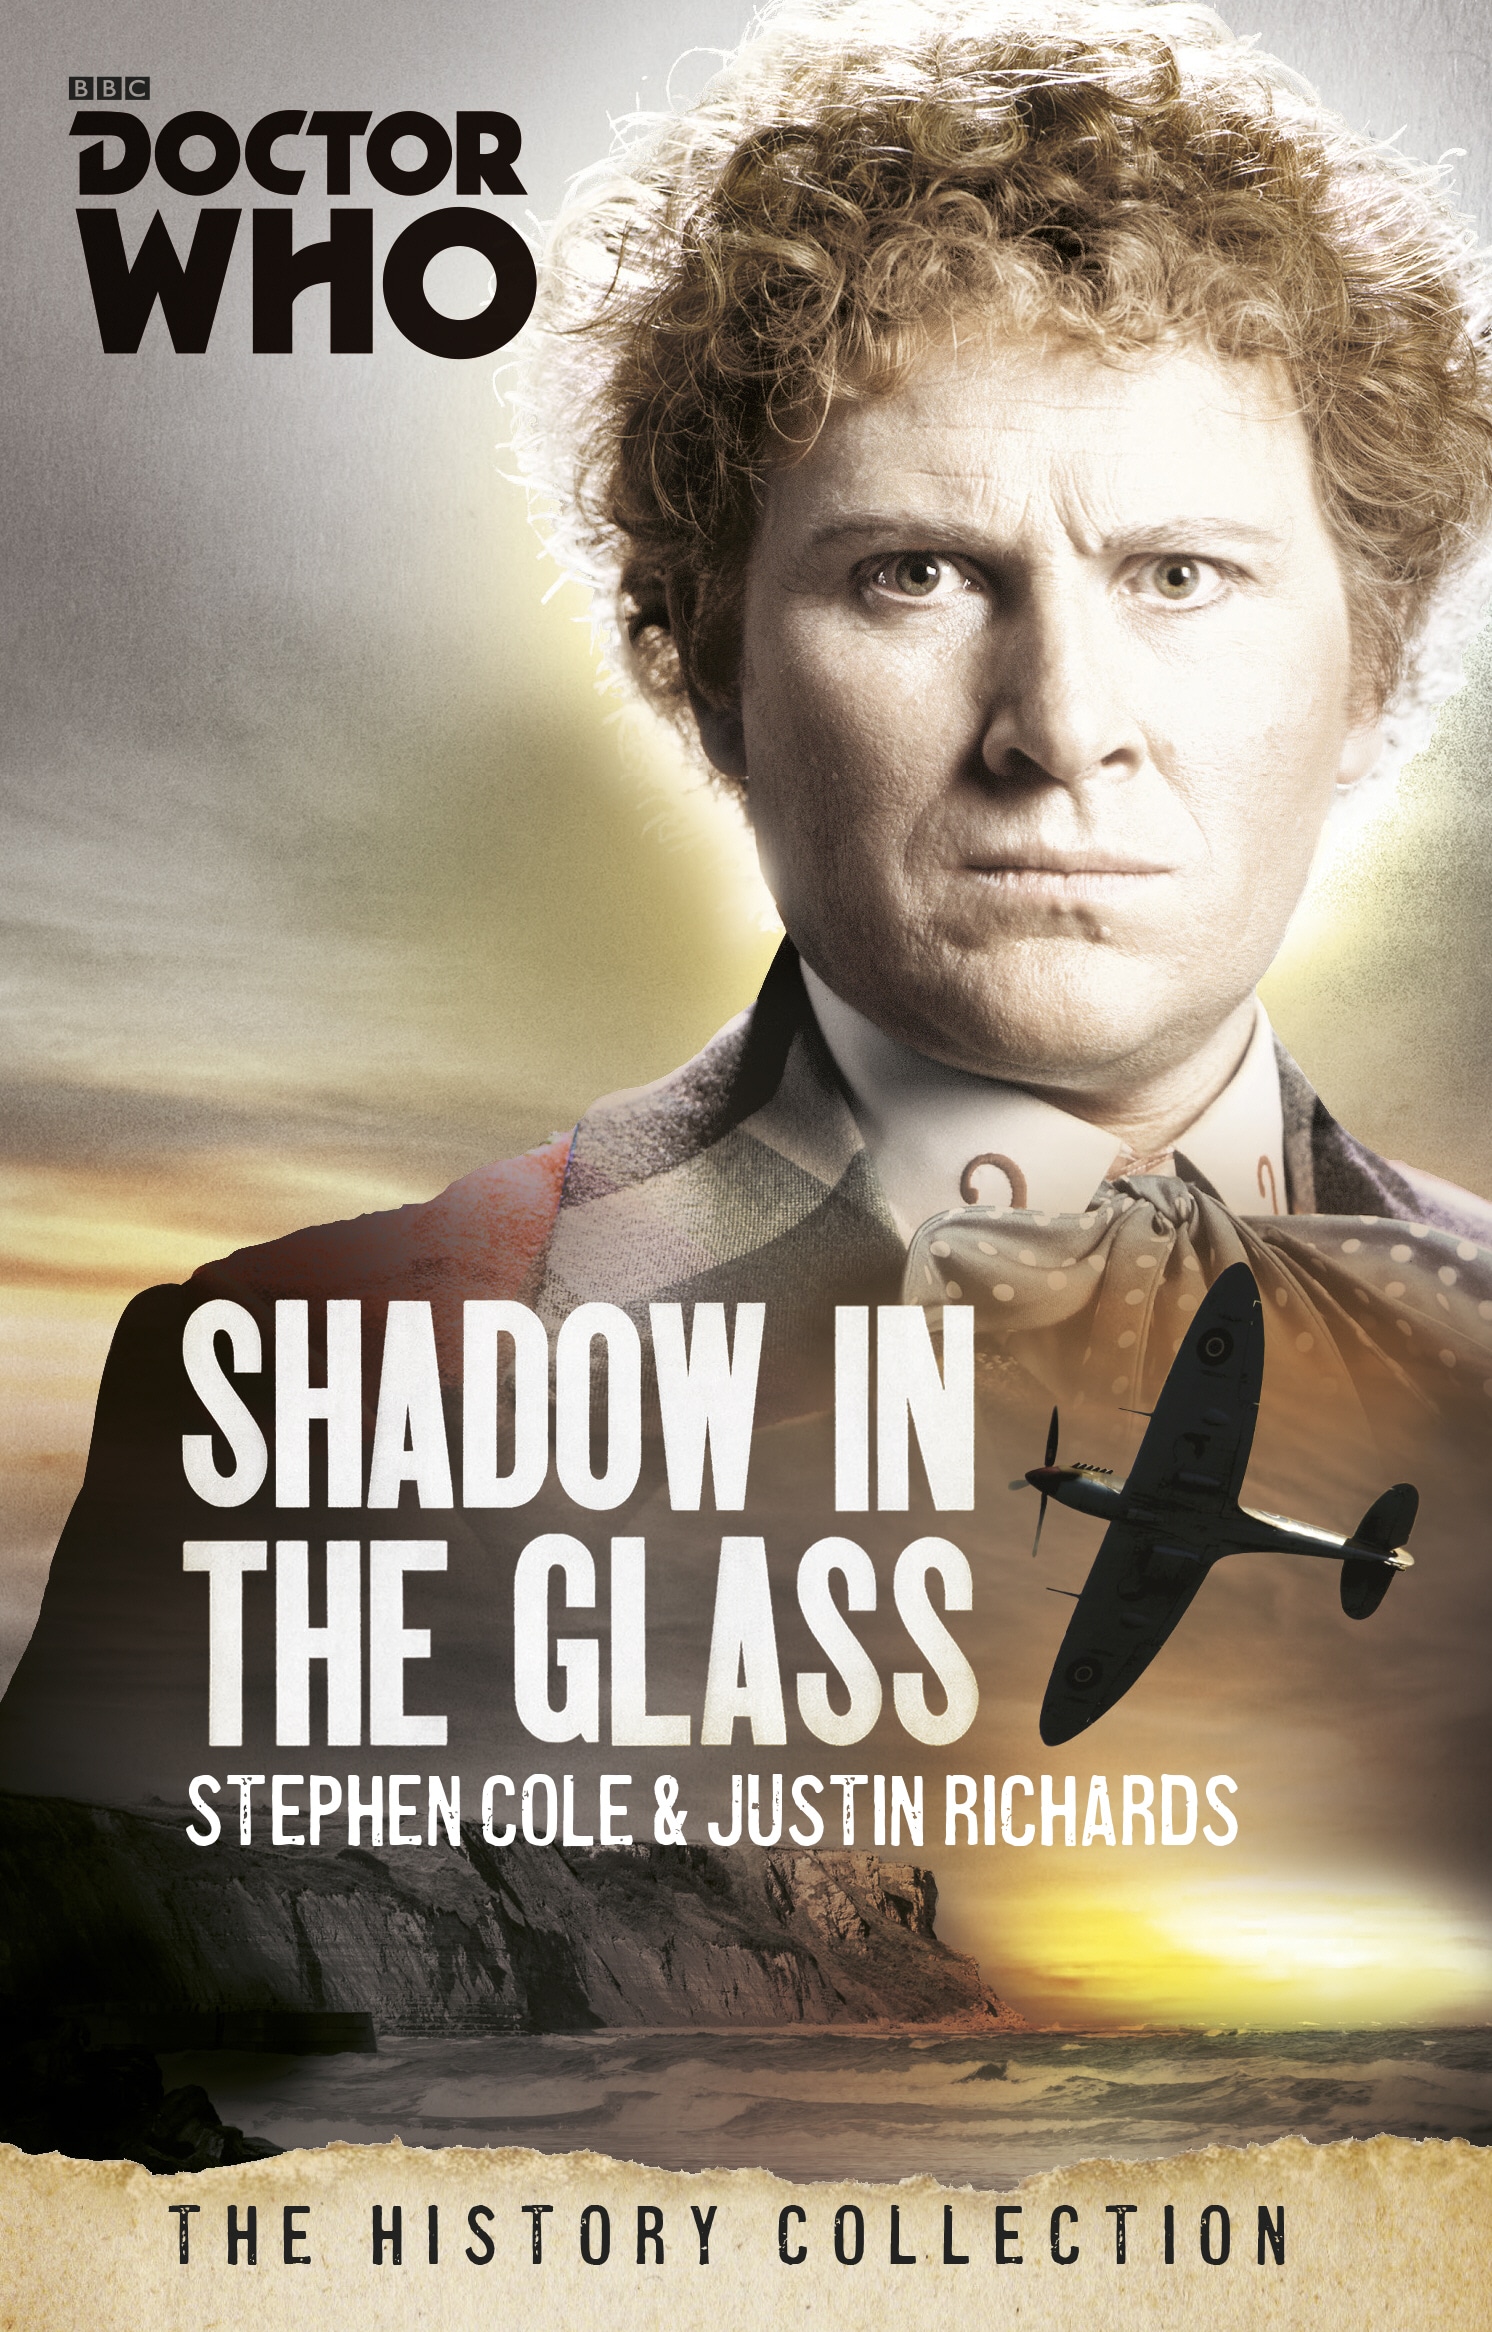 Book “Doctor Who: The Shadow In The Glass” by Justin Richards, Steve Cole — February 12, 2015